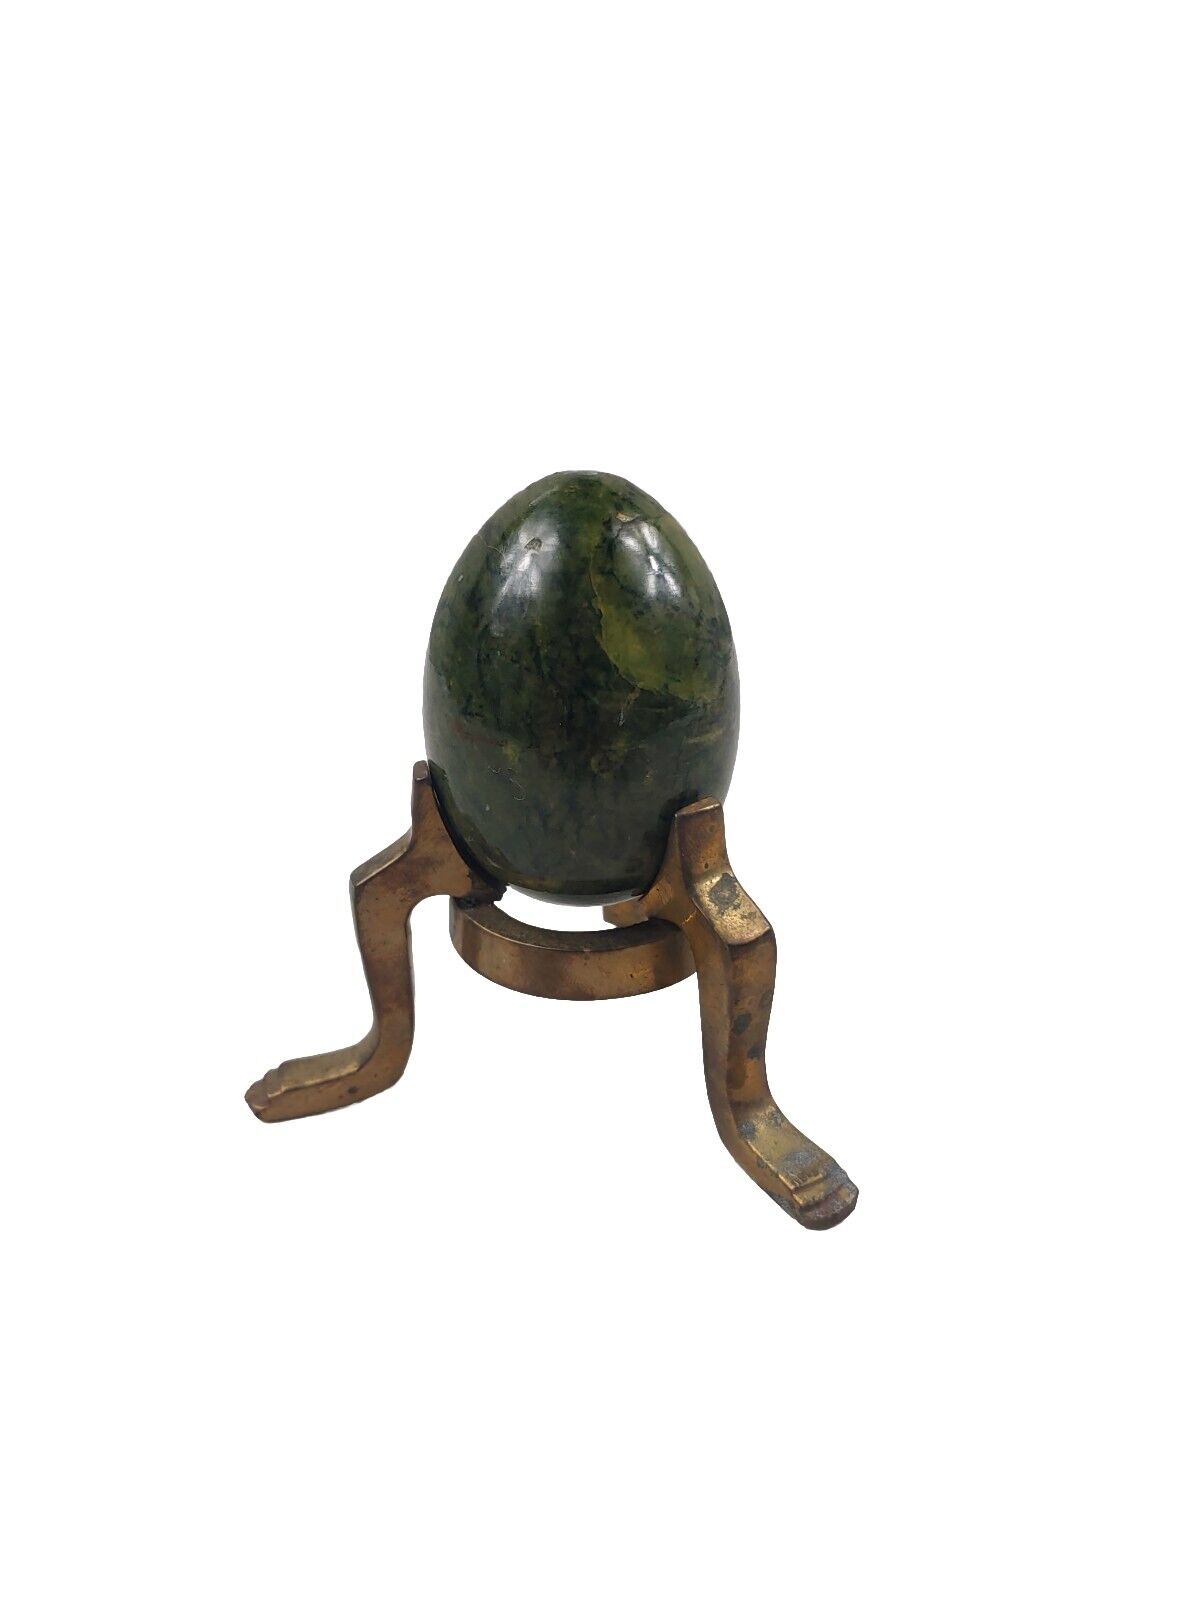 Vintage Small Decorative Egg With Brass Stand Easter Spring 4\